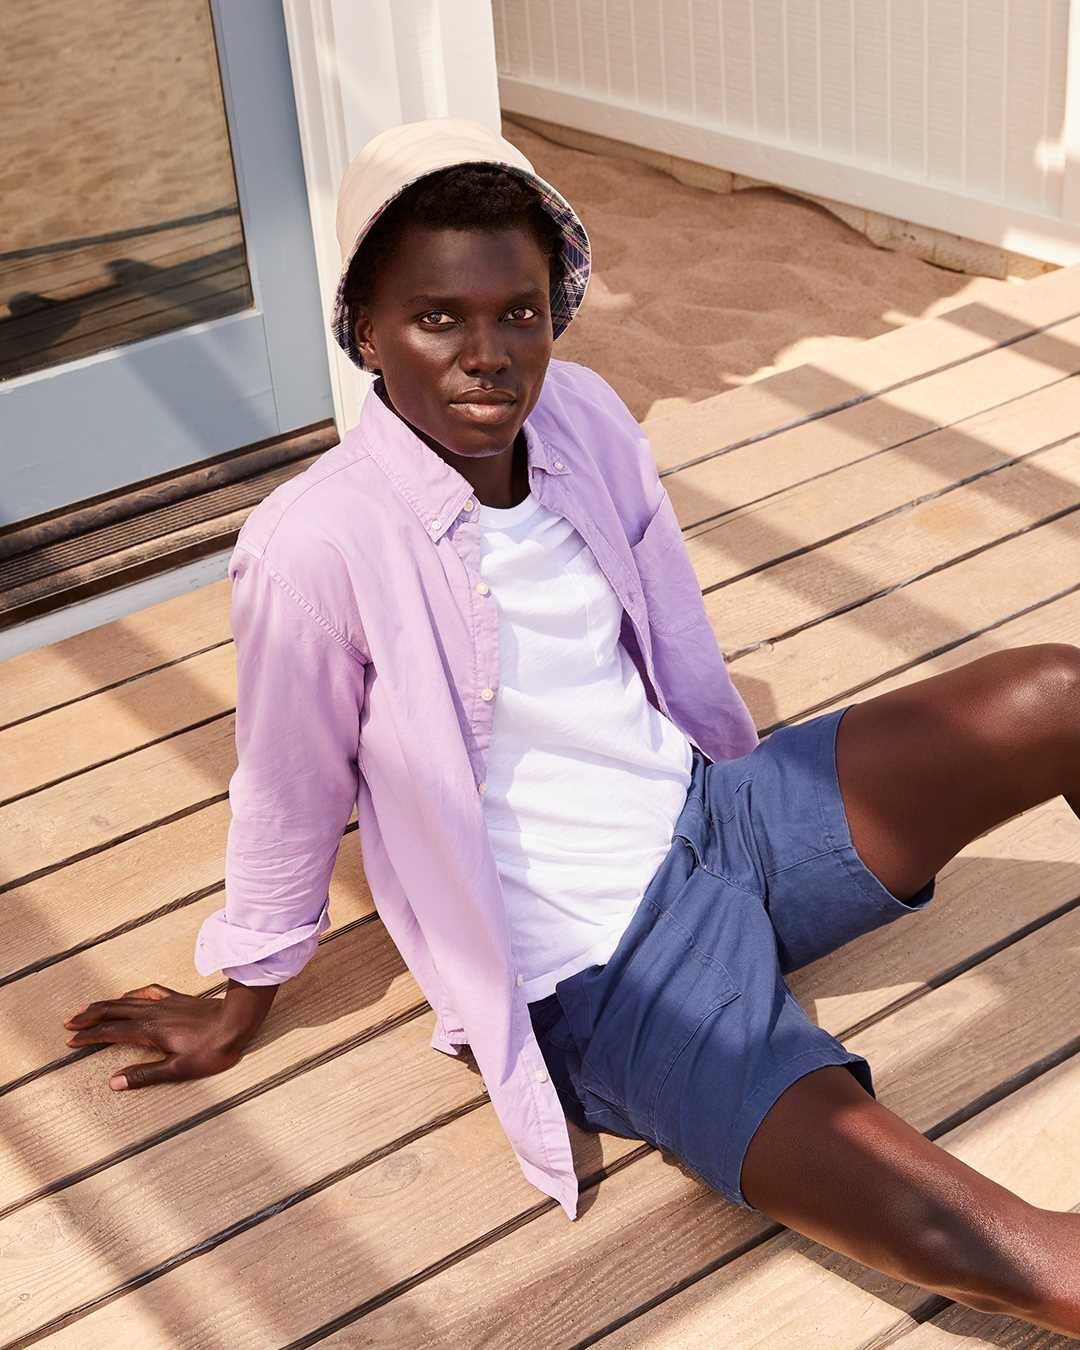 Style Here ➡ Stock up on the latest summer styles from @jcrew inside Warehouse Row! Swipe through the photos to check out their latest arrivals 👗👕👠👔
.
.
.
.
.
.
#jcrew #summerfashion #nooga #shopchattanooga #jcrewstyle #jcrewmens #summerstyle #wa